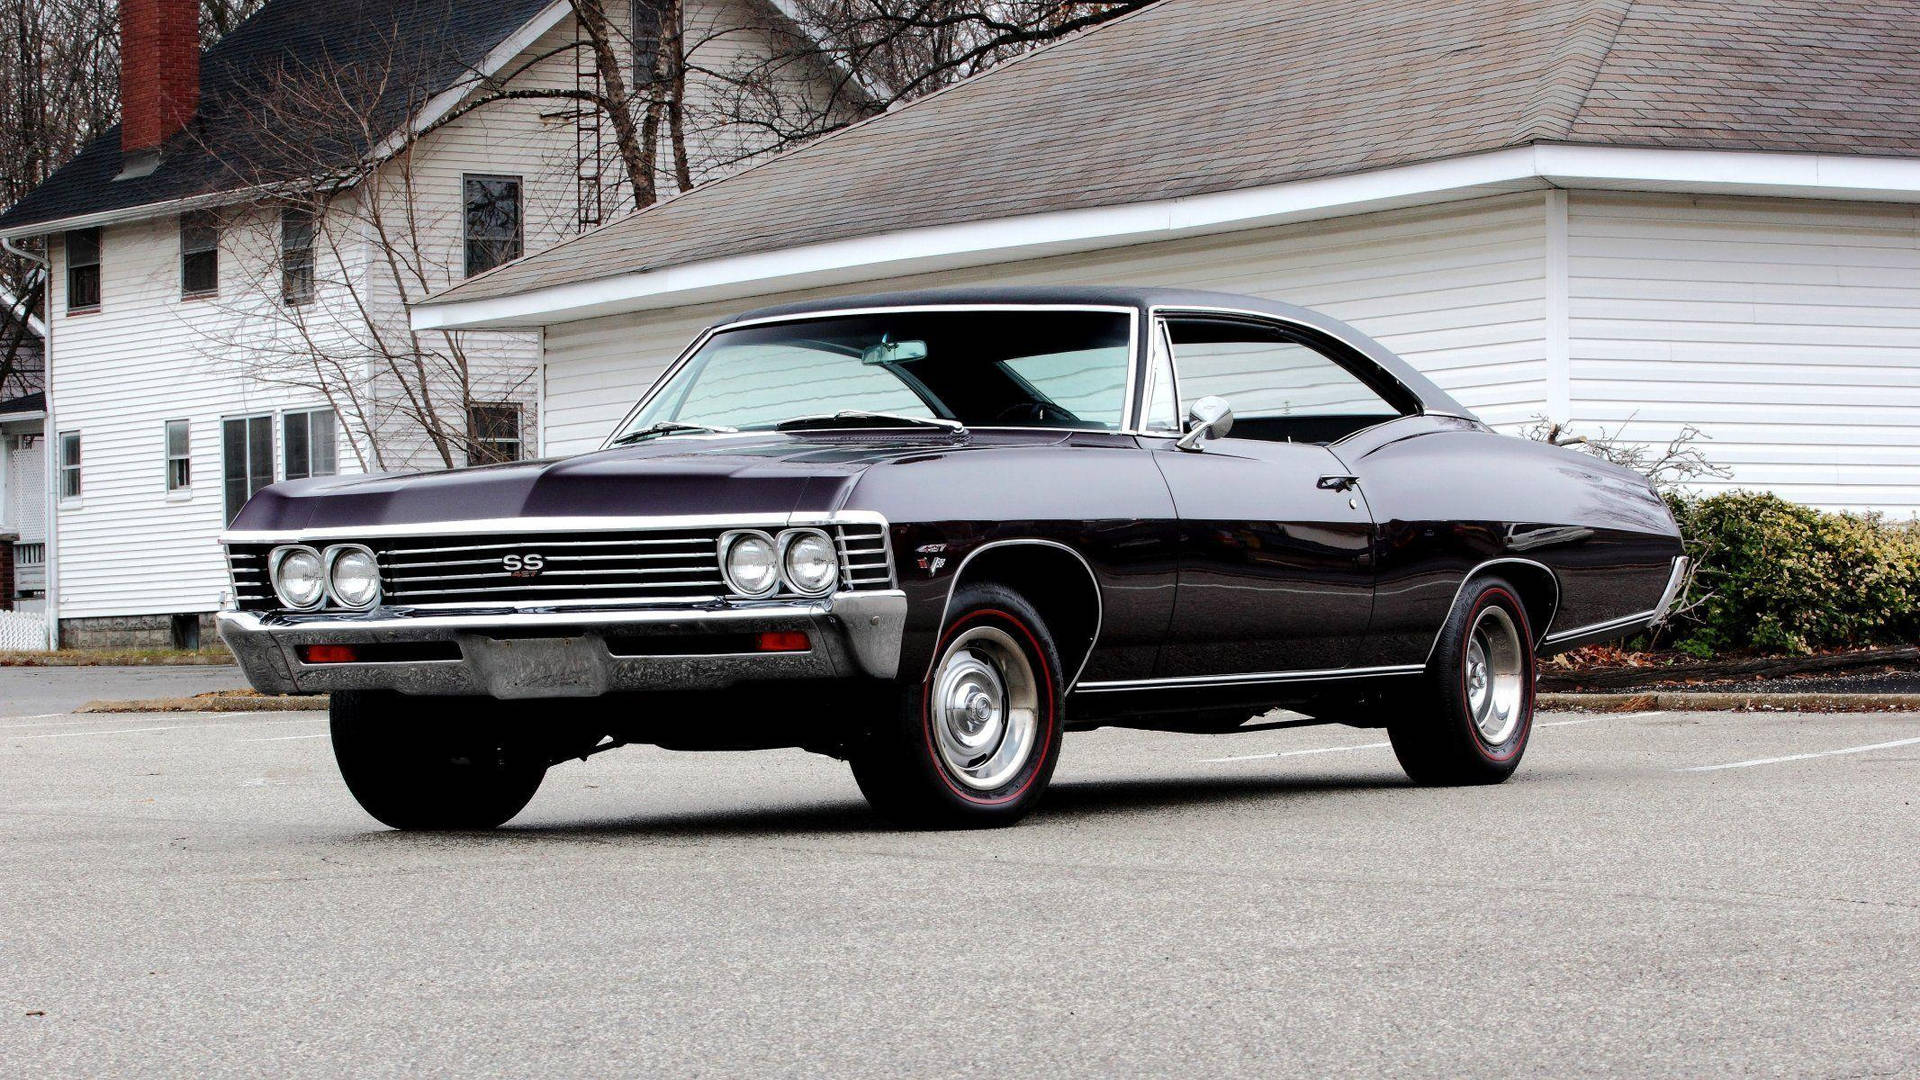 Classic Elegance With The 1967 Chevrolet Impala Ss 427